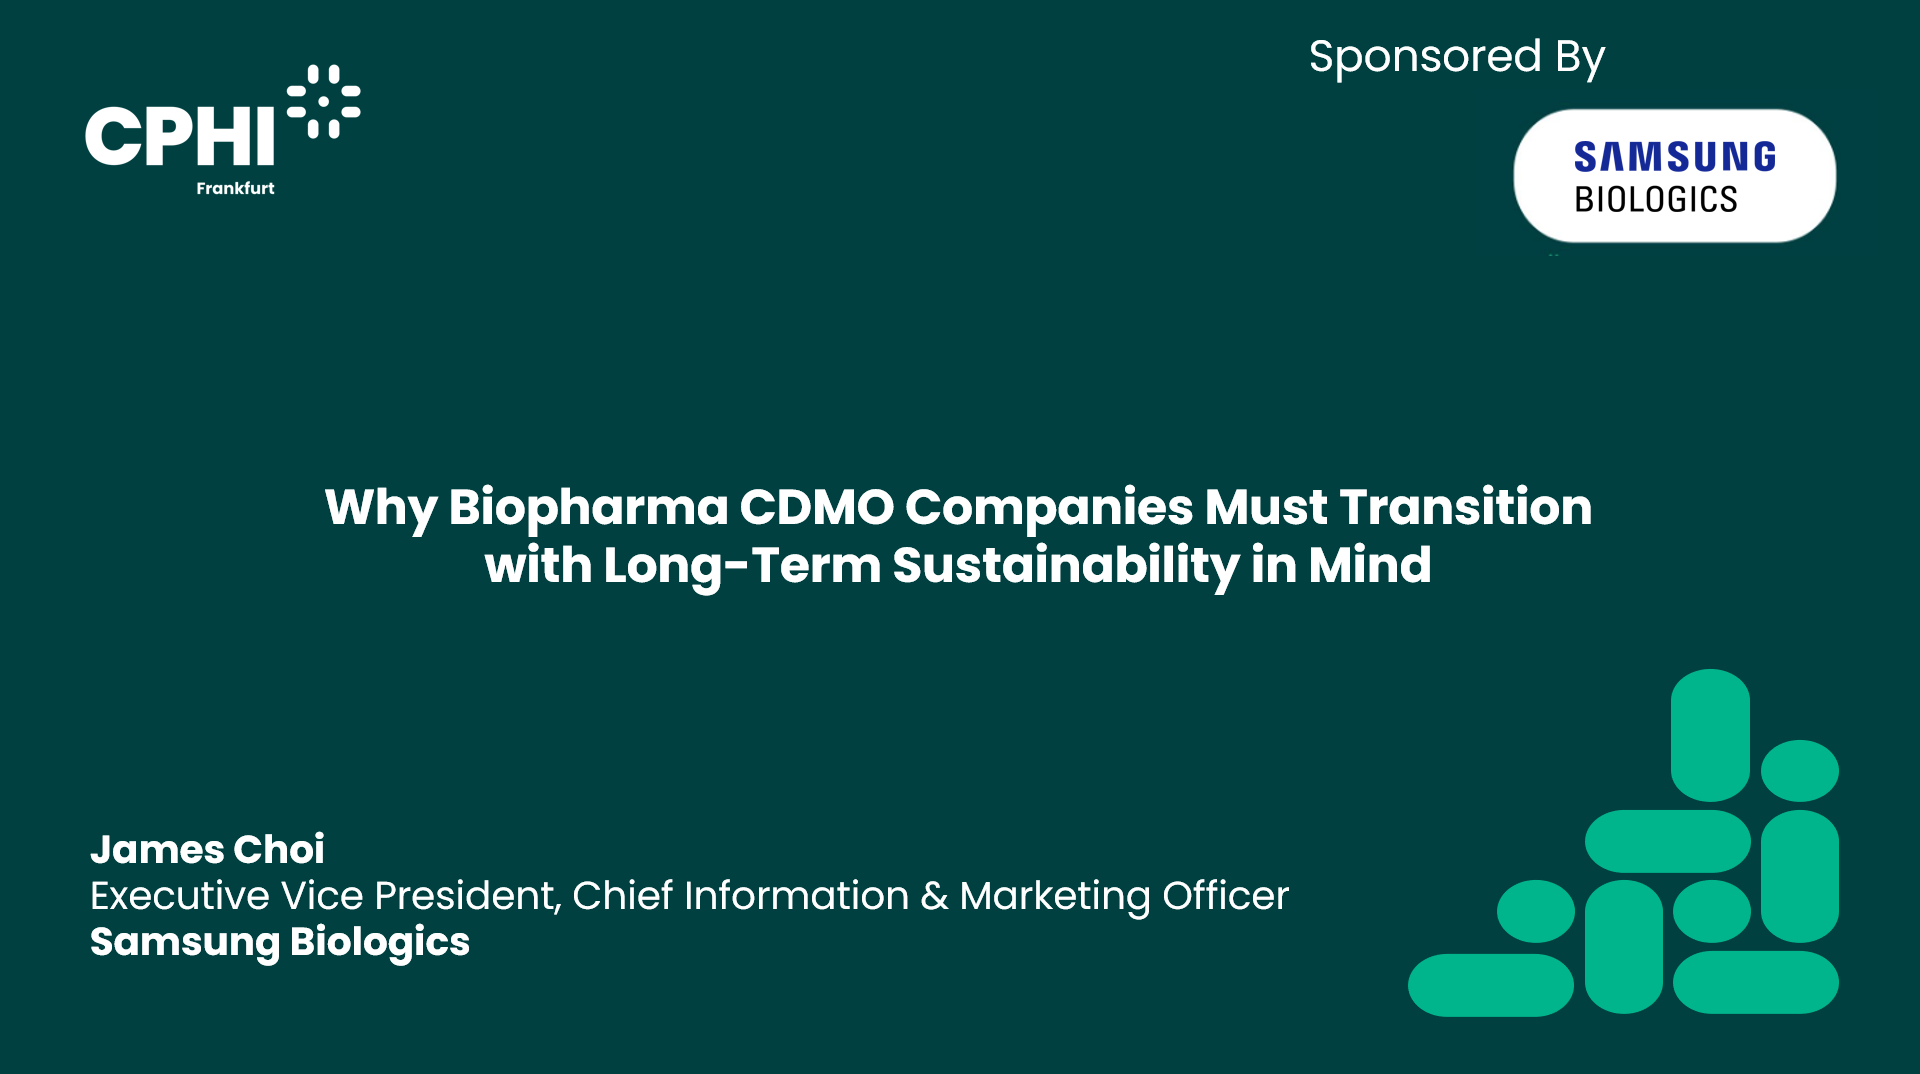 Why Biopharma CDMO Companies Must Transition with Long-Term Sustainability in Mind